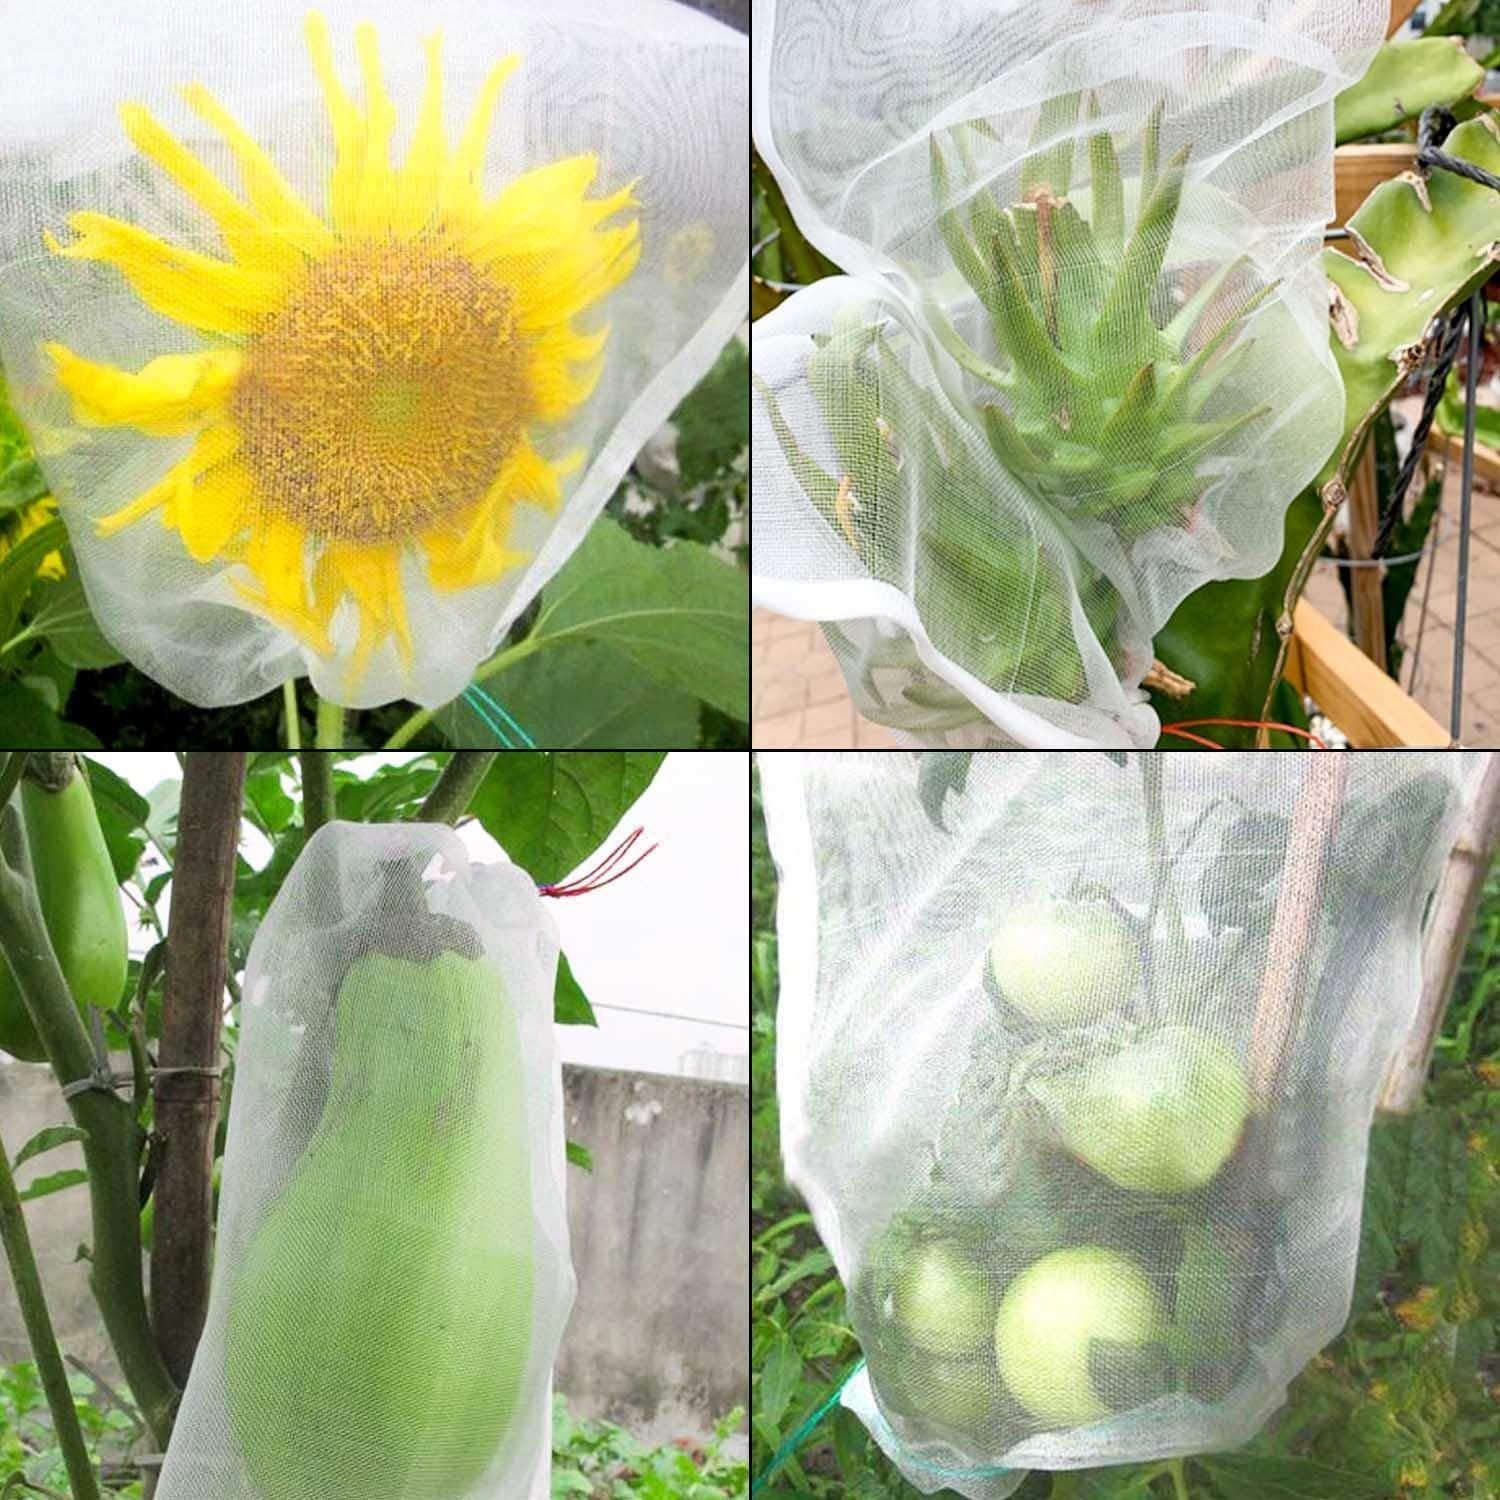 🔥Last Day Promotion 50% OFF - Fruit Vegetable Insect Proof Mesh Bag